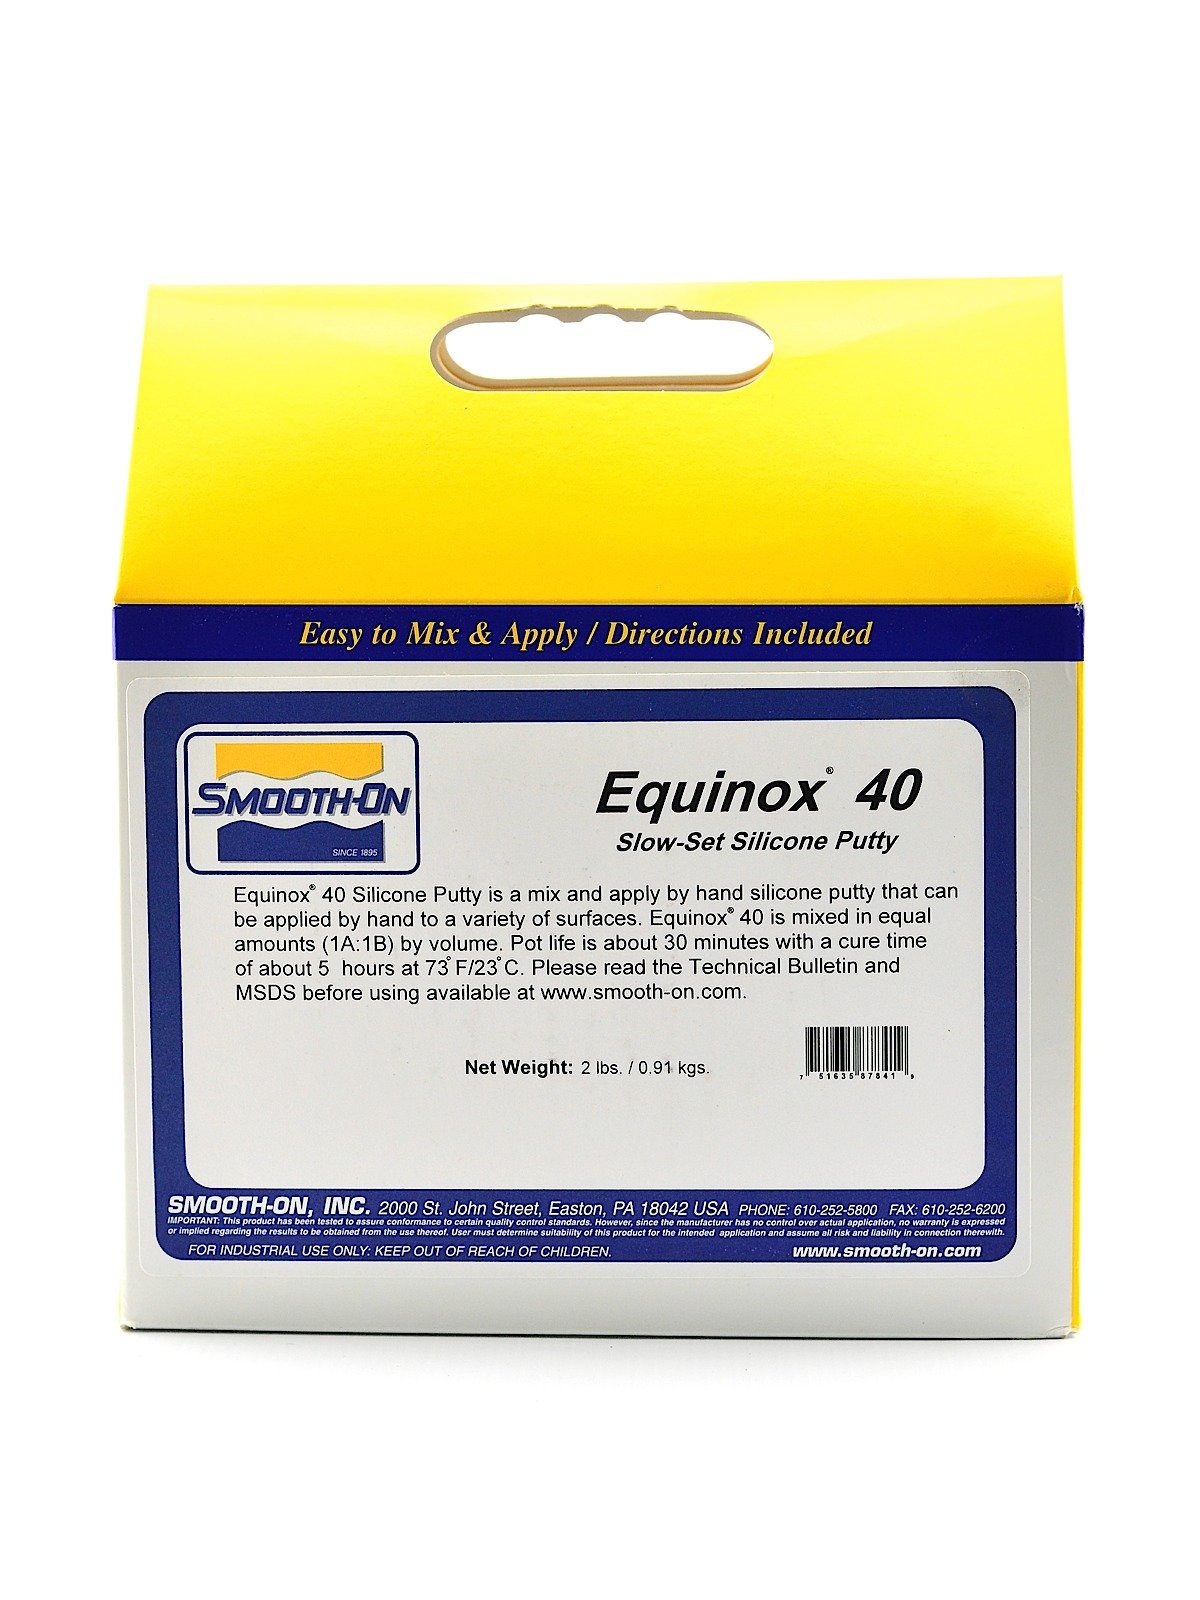 Smooth-On Equinox Slow Silicone Putty Kit - 16 oz.